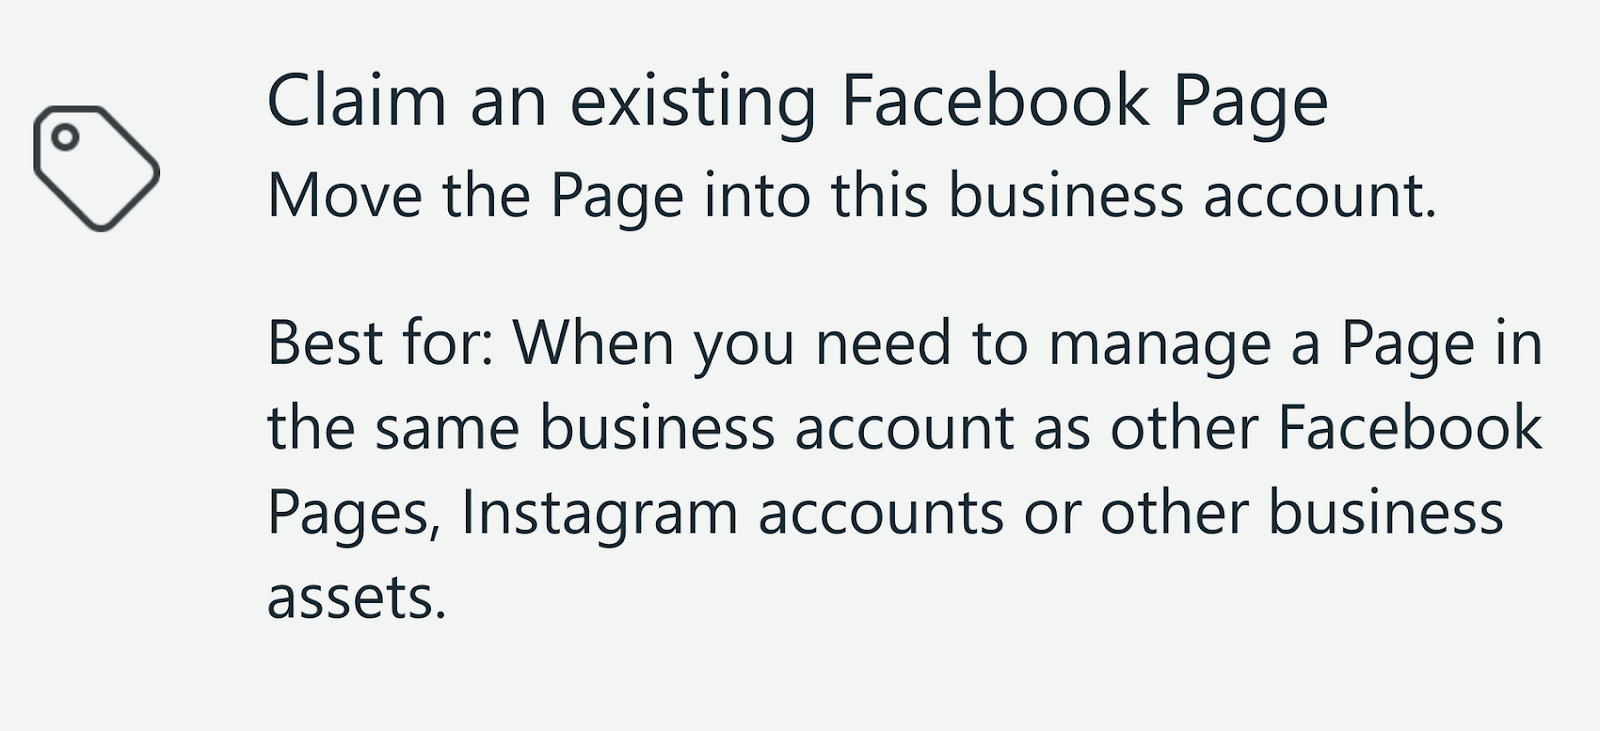 “Claim an existing Facebook Page” option